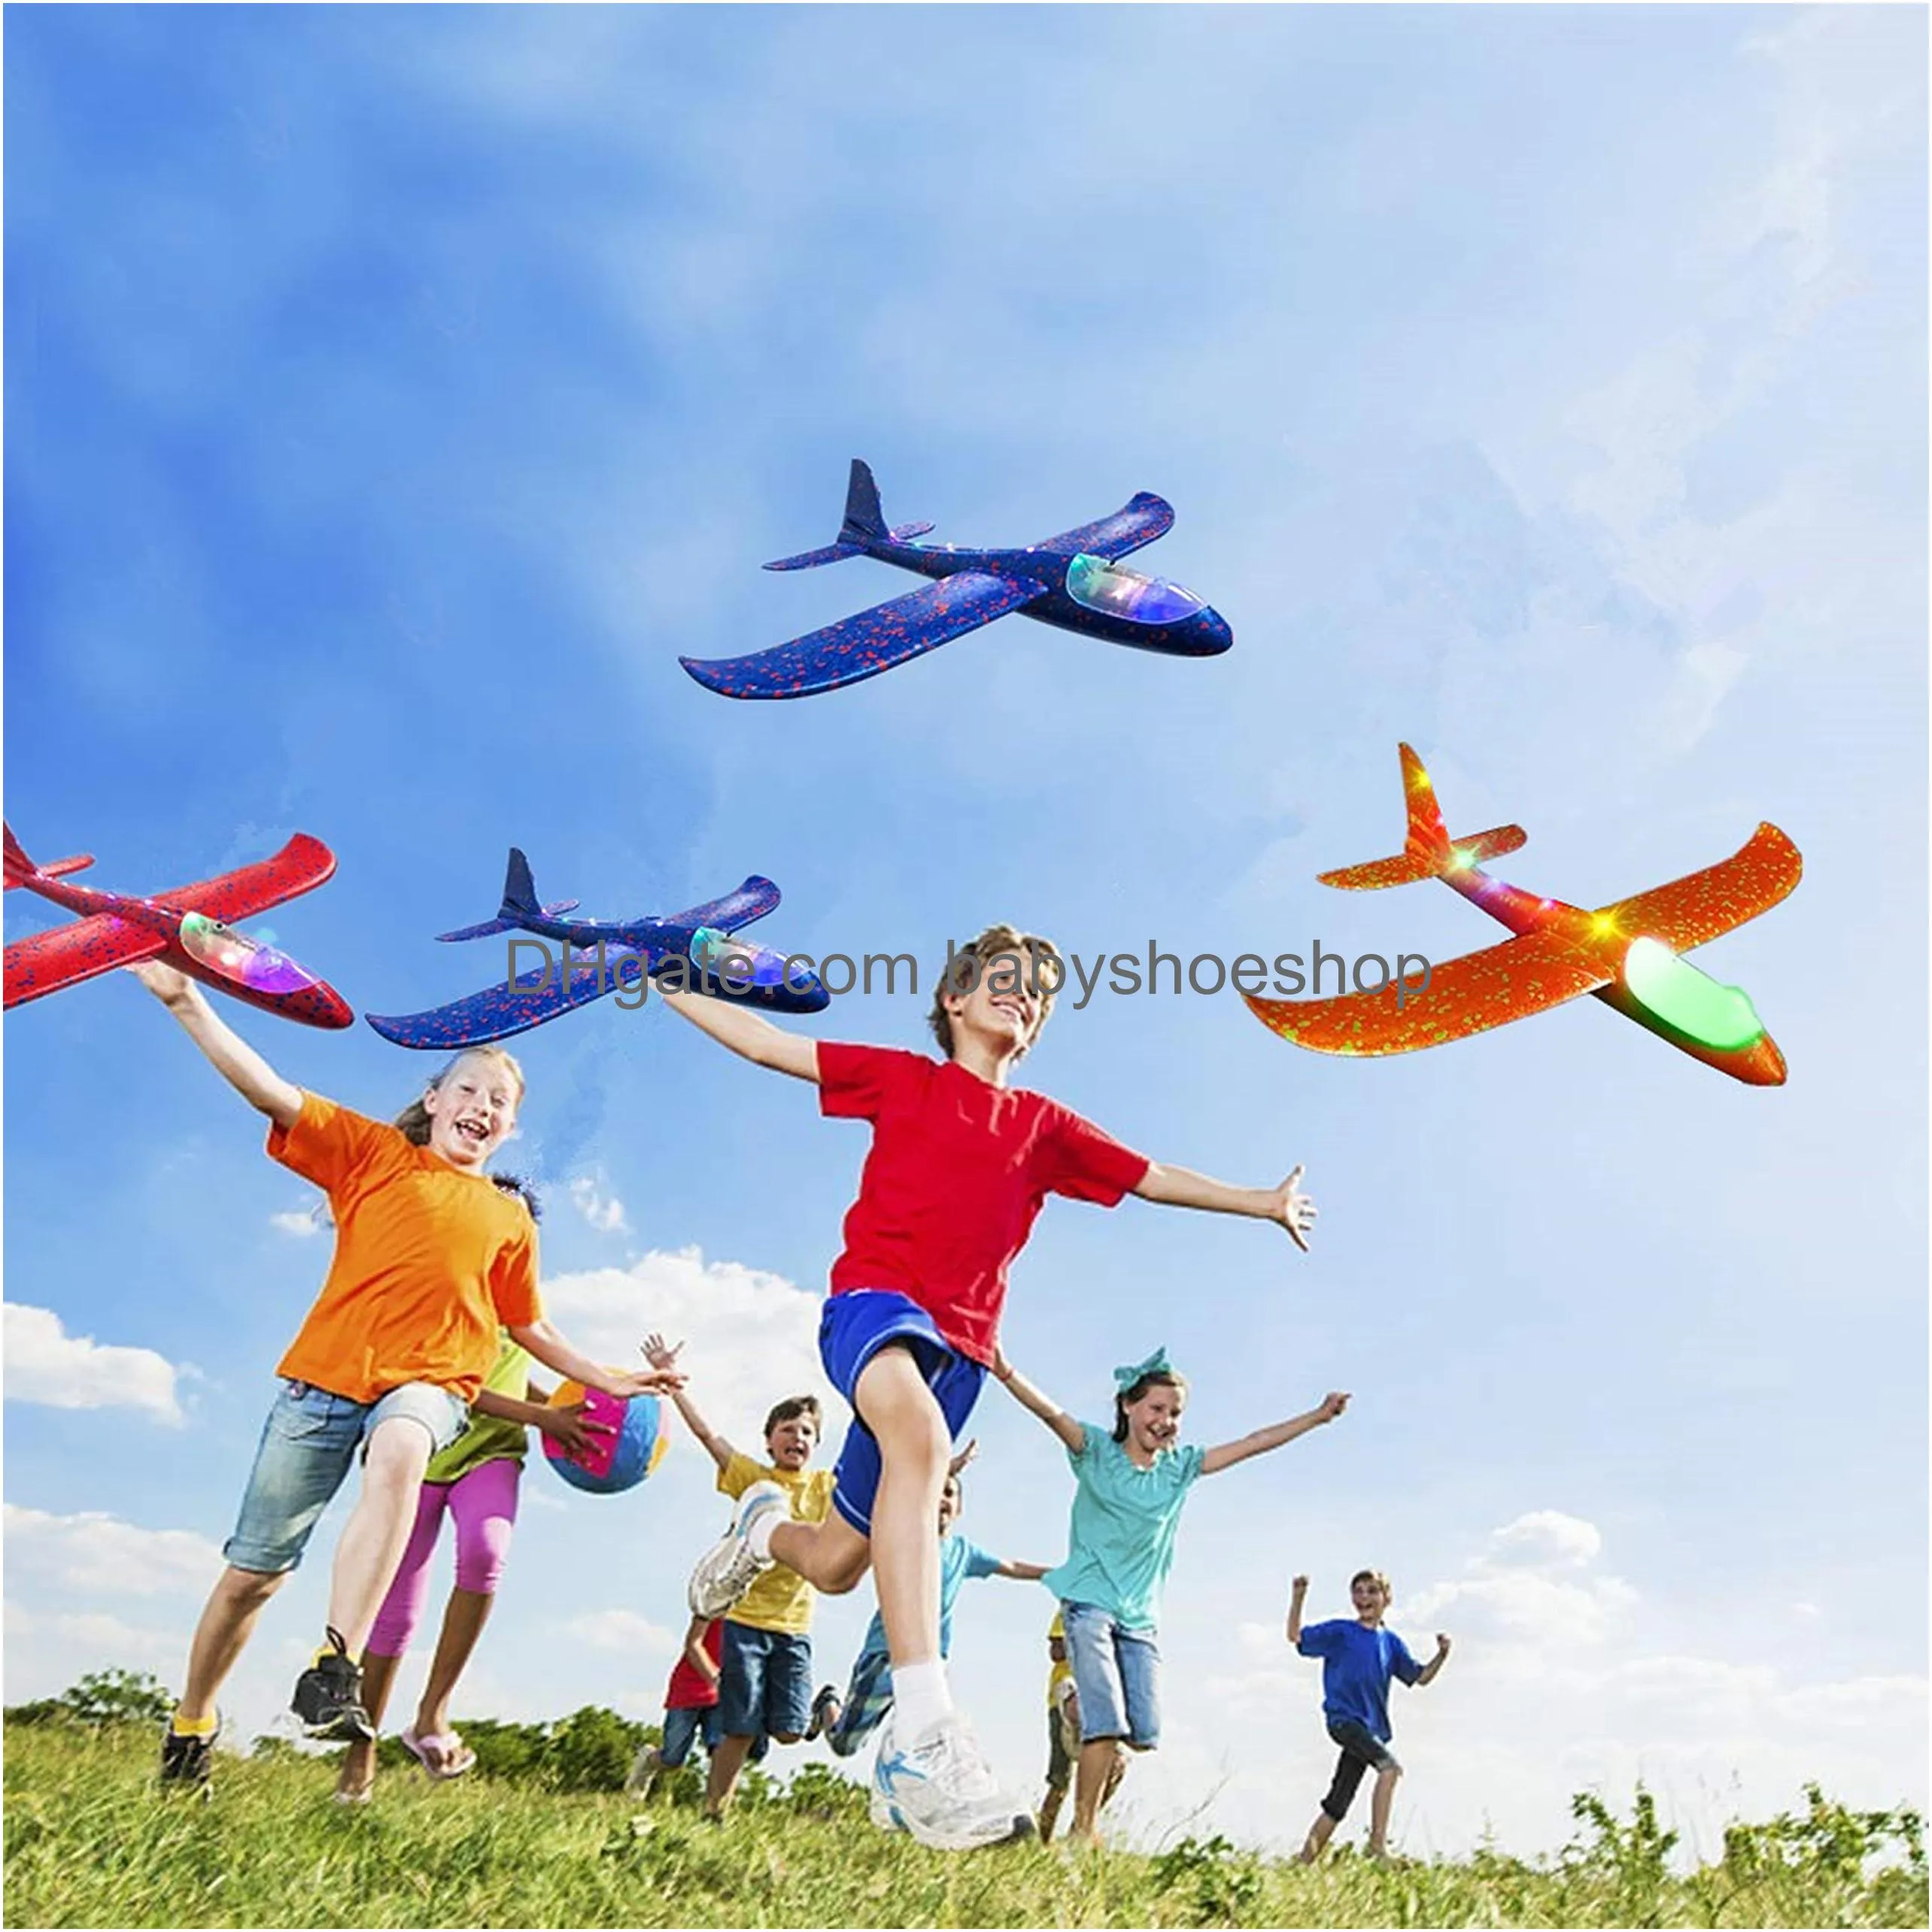 foam airplanes for kids 18.9 throwing airplane toys led light up flight mode glider plane toys flying toys fun summer activities for kids sports game outdoor toys for boys girls kid gifts